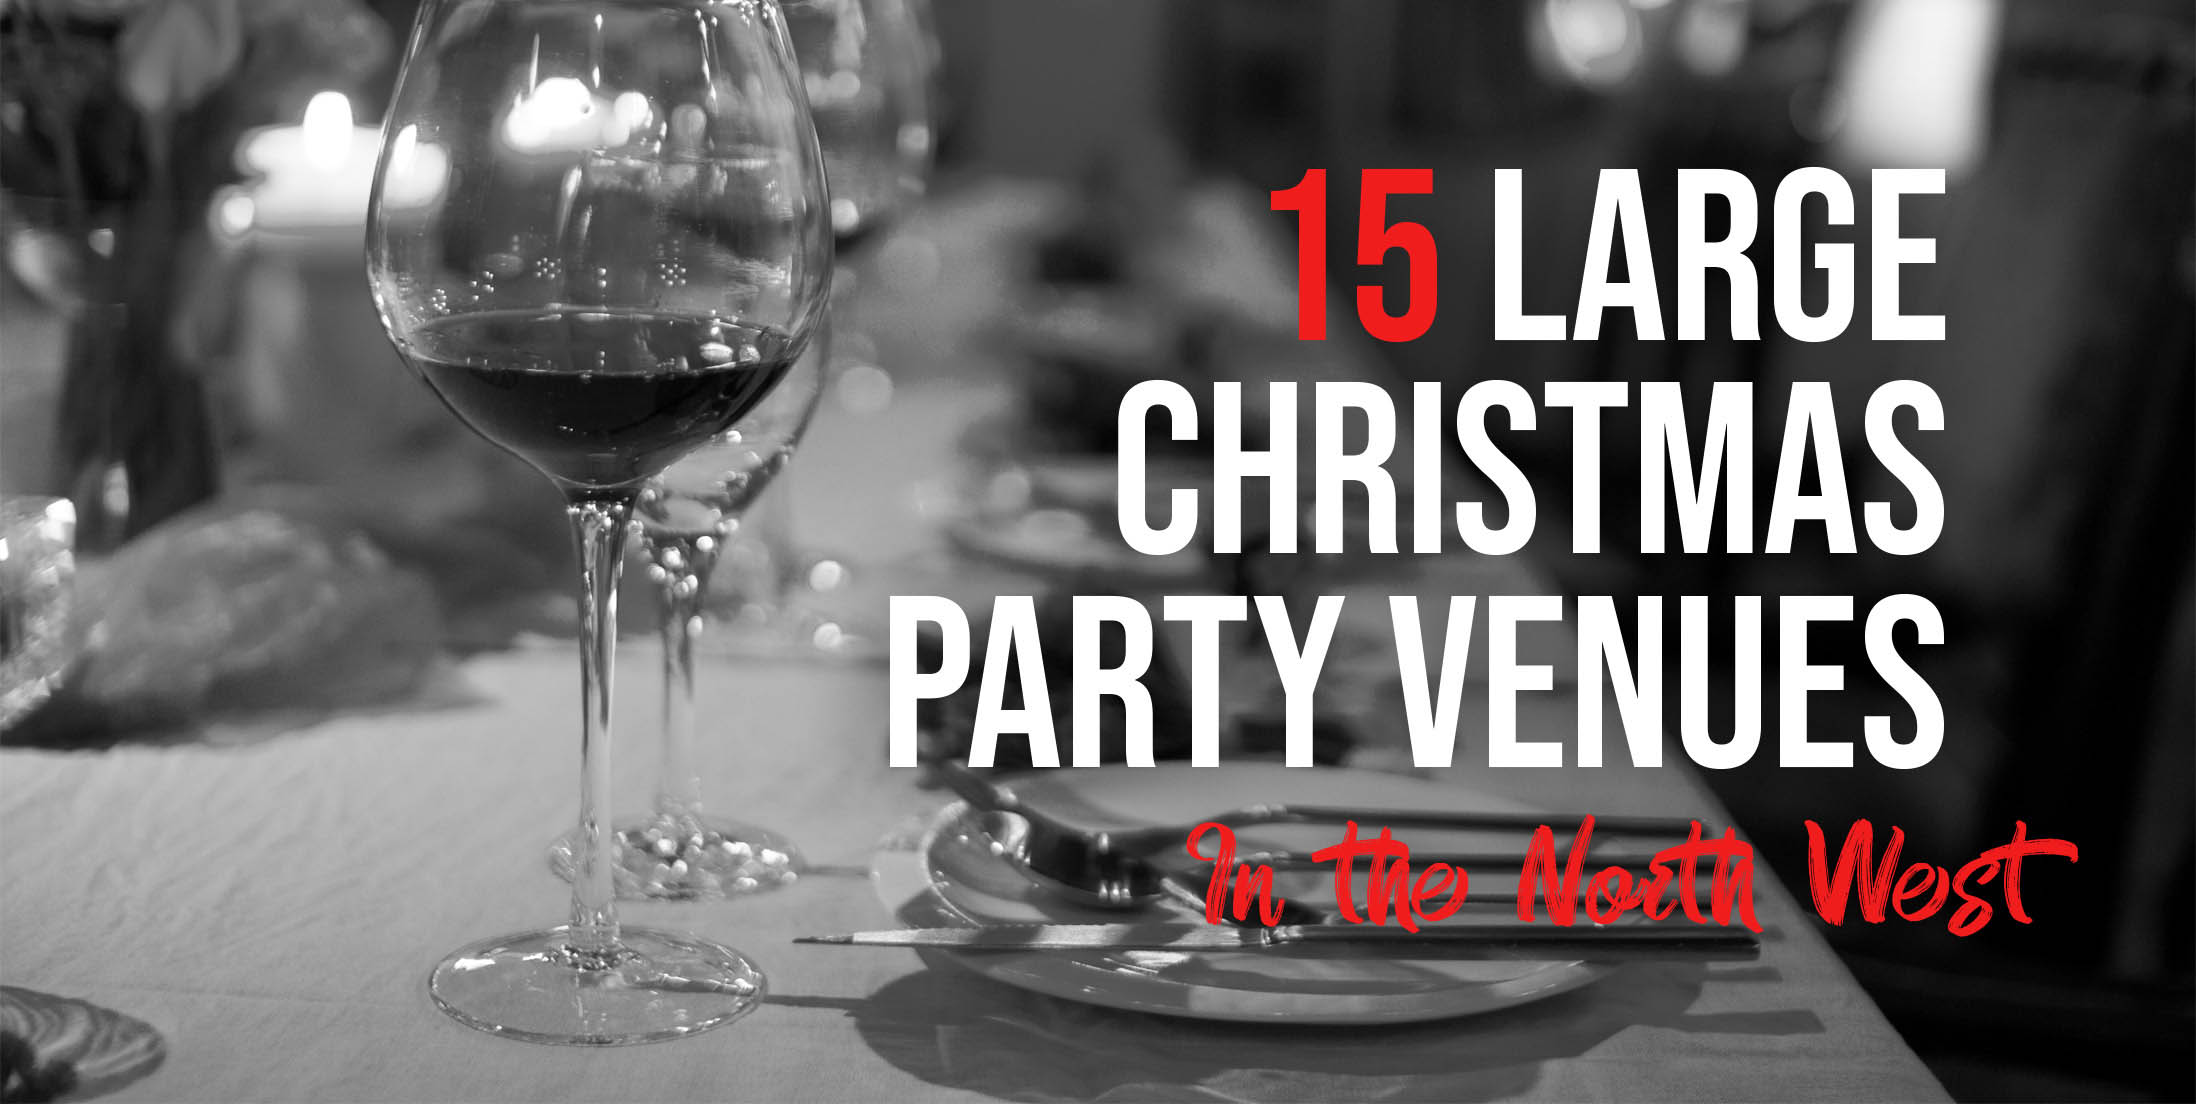 15 Large Christmas Party Venues in the North West